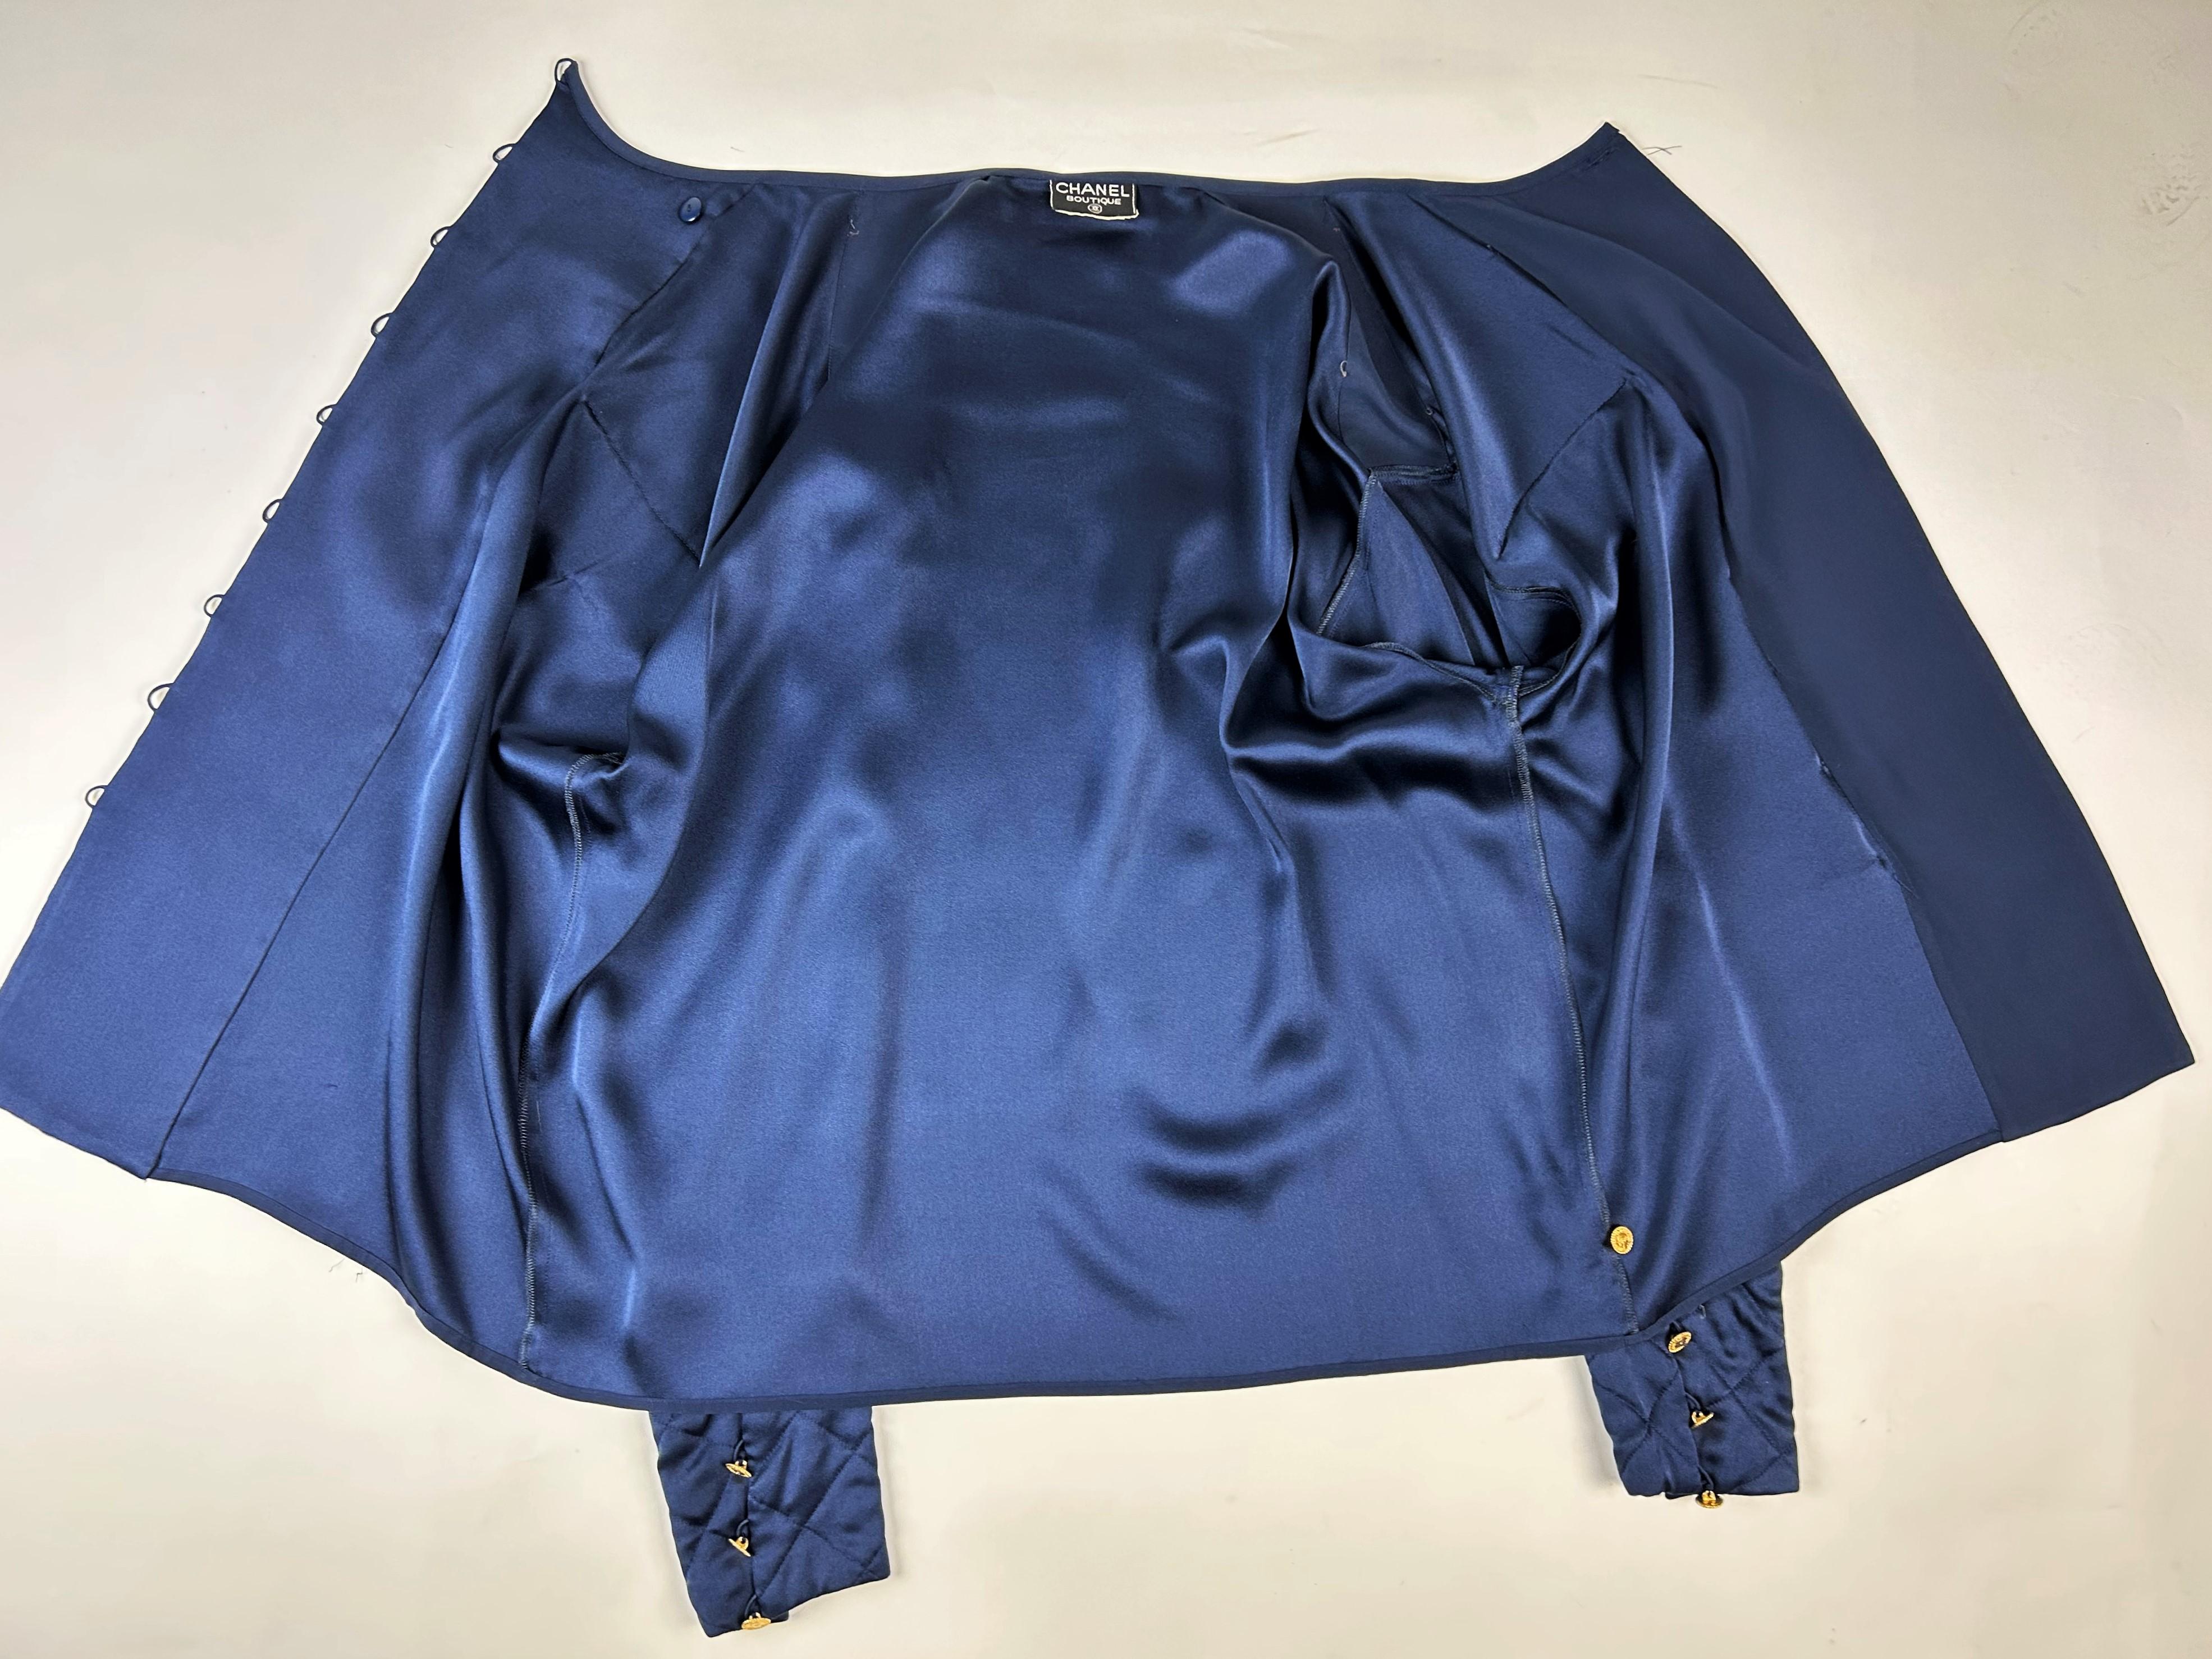 Circa 1995

France

Navy crepe blouse from Chanel Boutique dating from the Lagerfeld years when he was head of this famous House. Loose, flowing blouse with cross-buttoning. Complete with 19 gold metal buttons with the Coco Chanel logo, Paris